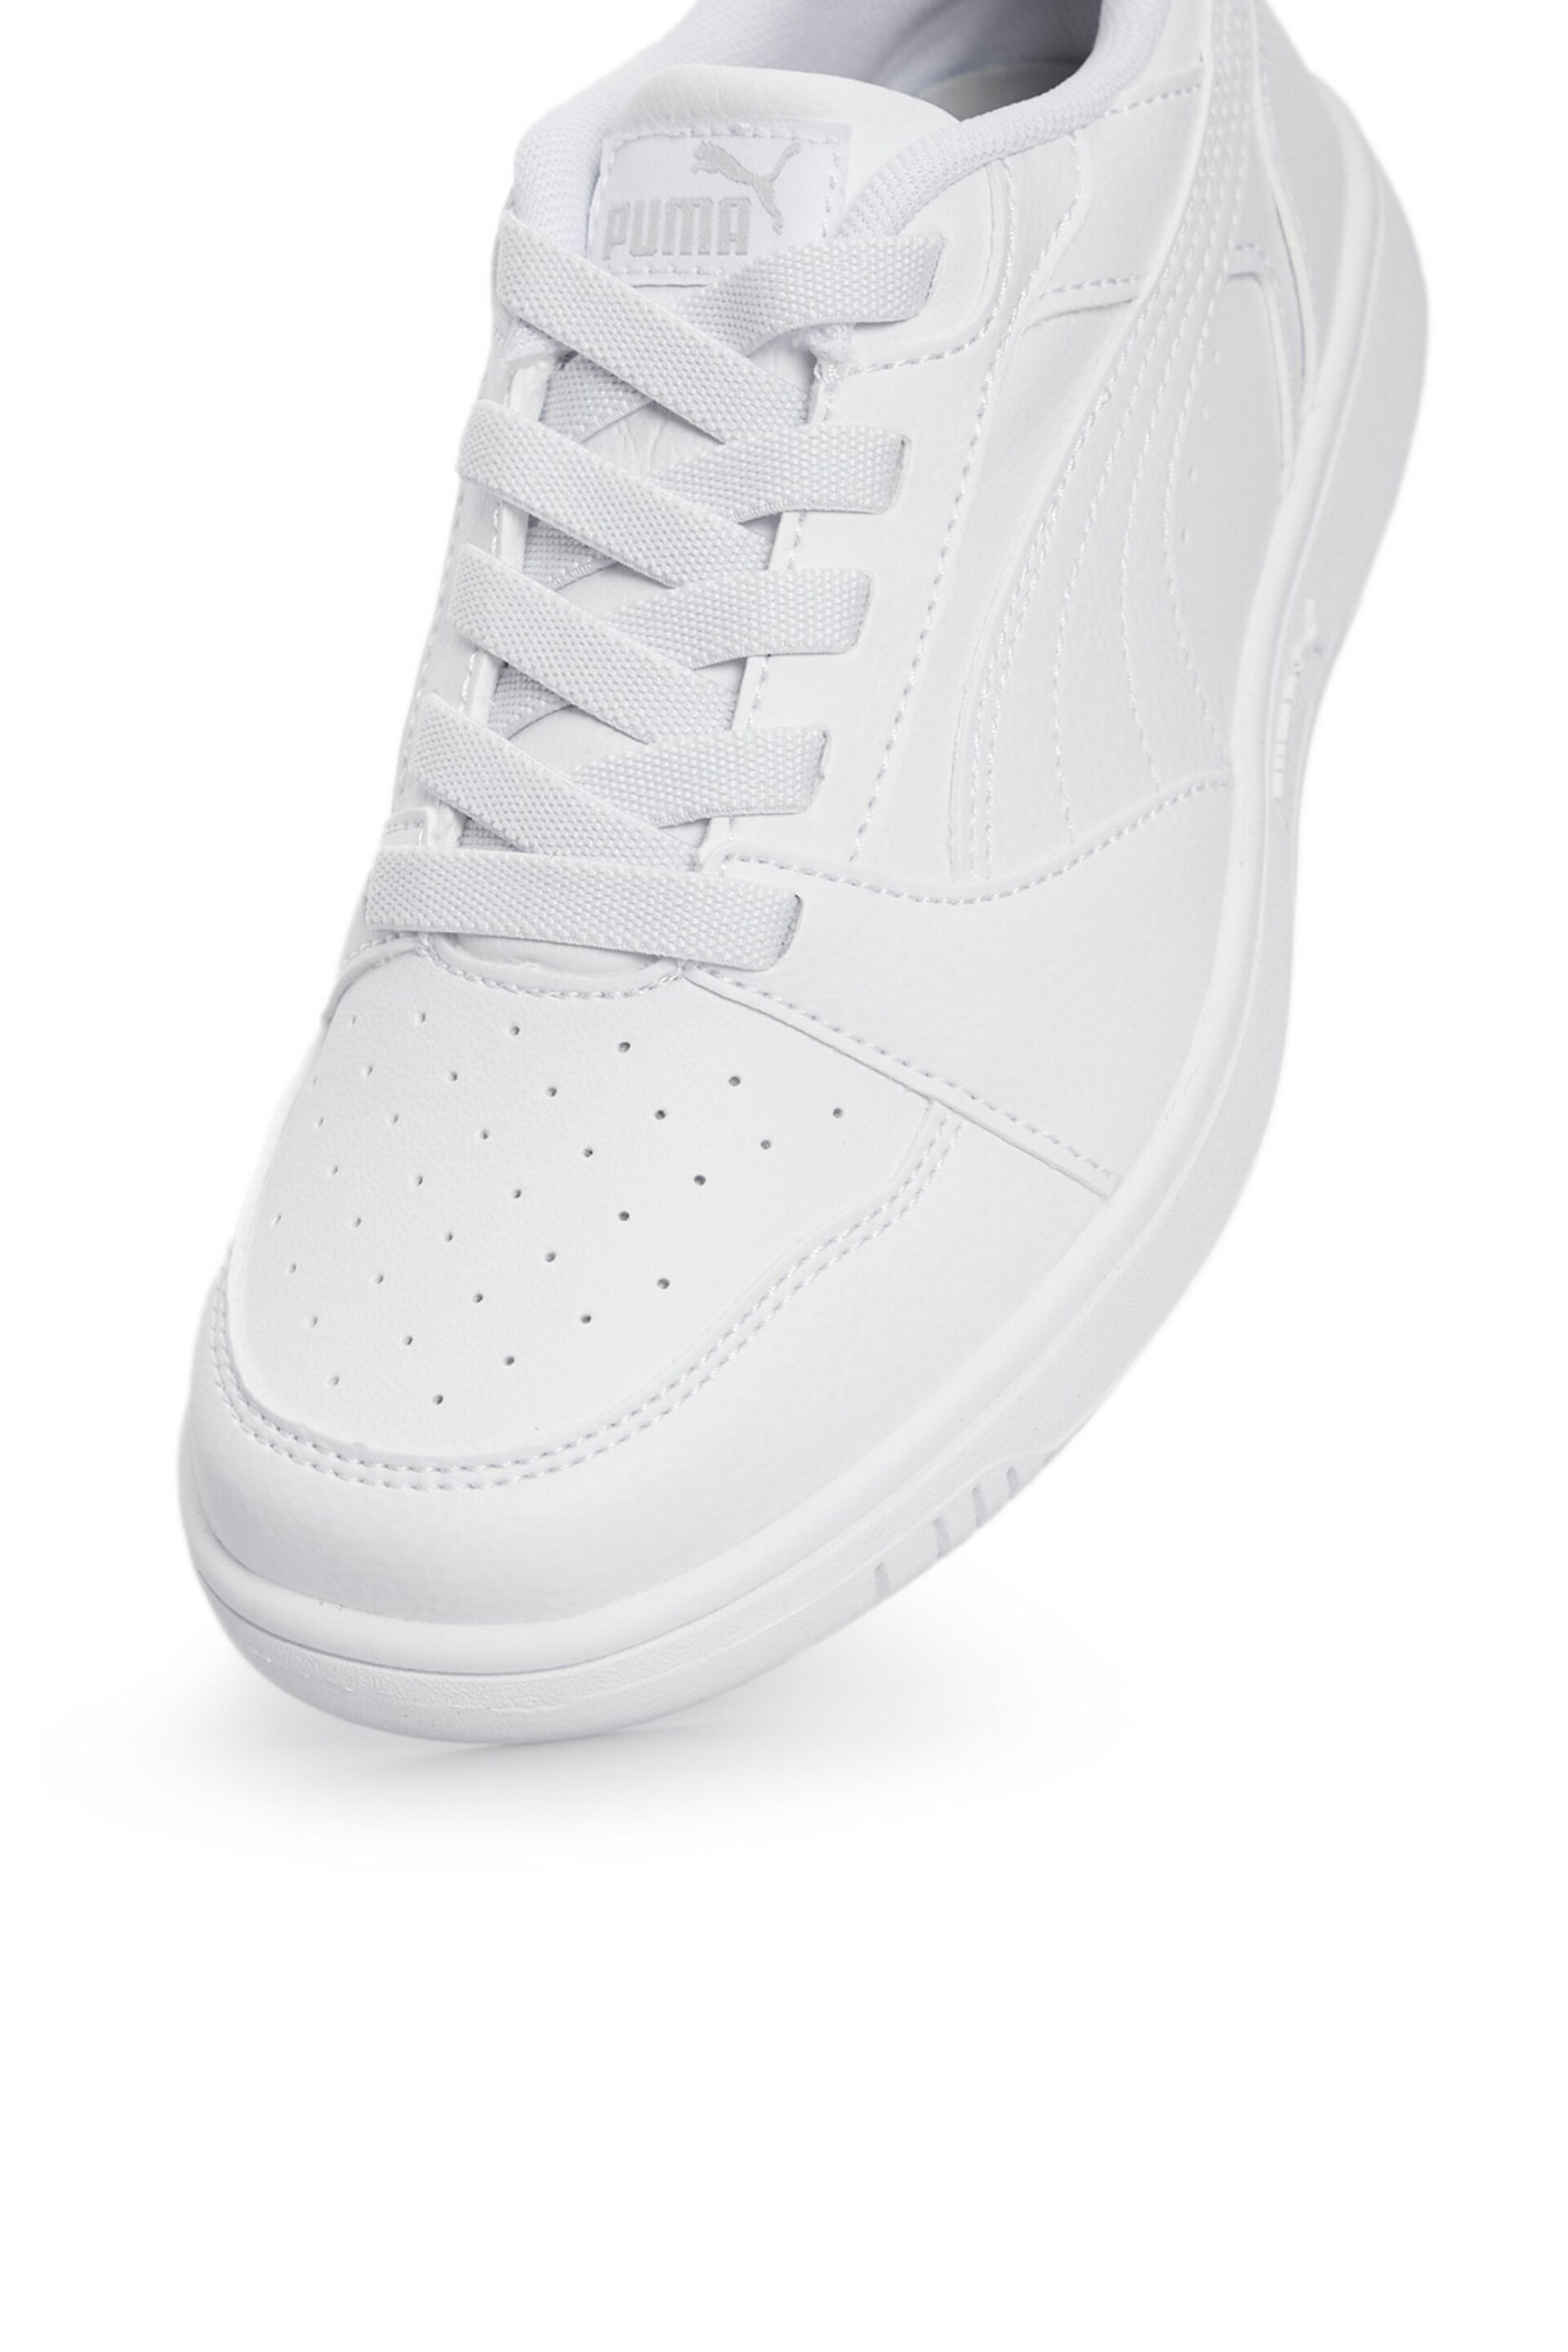 Puma White Unisex Kids Rebound V6 LO Sneakers Trainers - Image 5 of 6